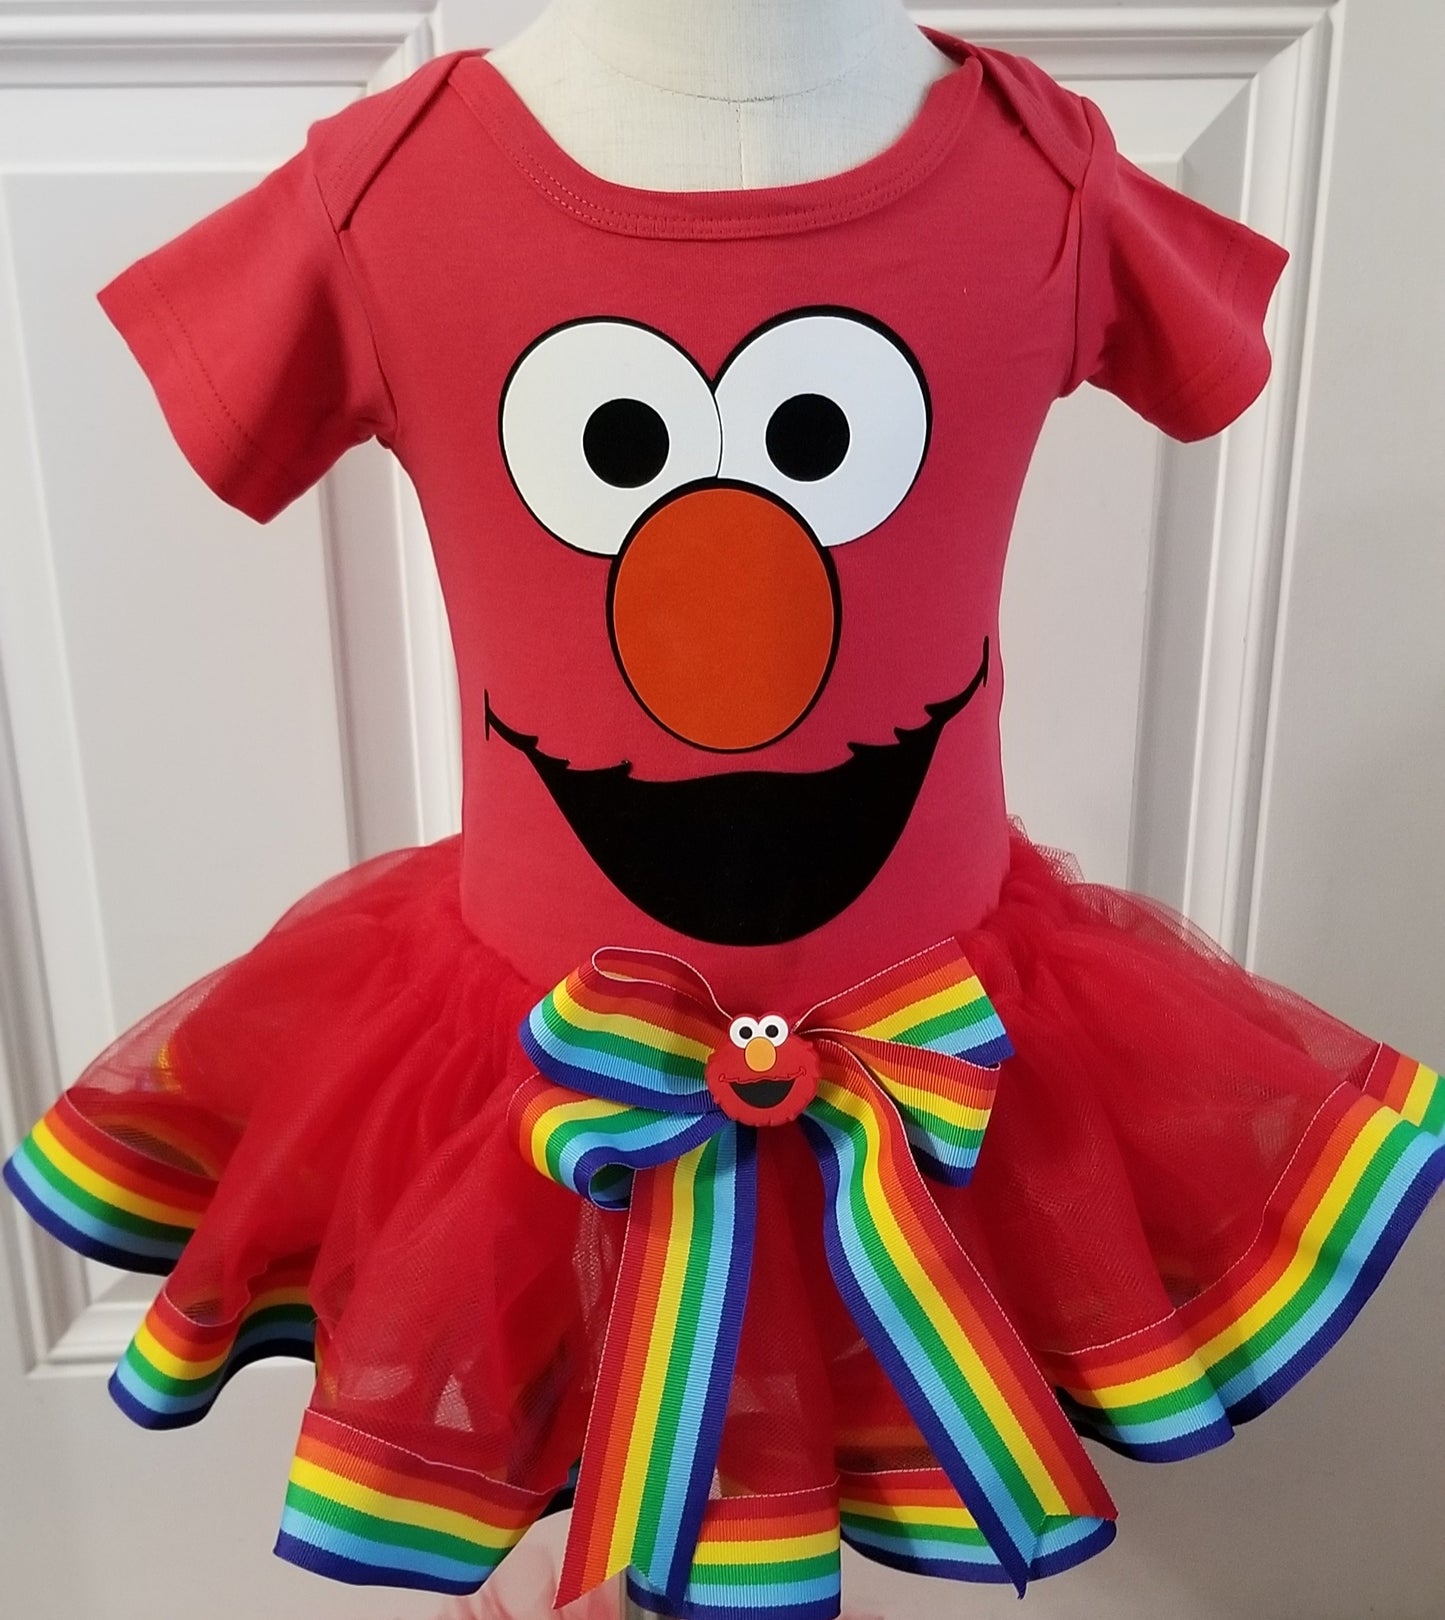 Girls 3 Piece ELMO Ribbon Tutu Outfit Includes Ribbon Tutu, Tshirt or Onesie and Matching Hair Bow